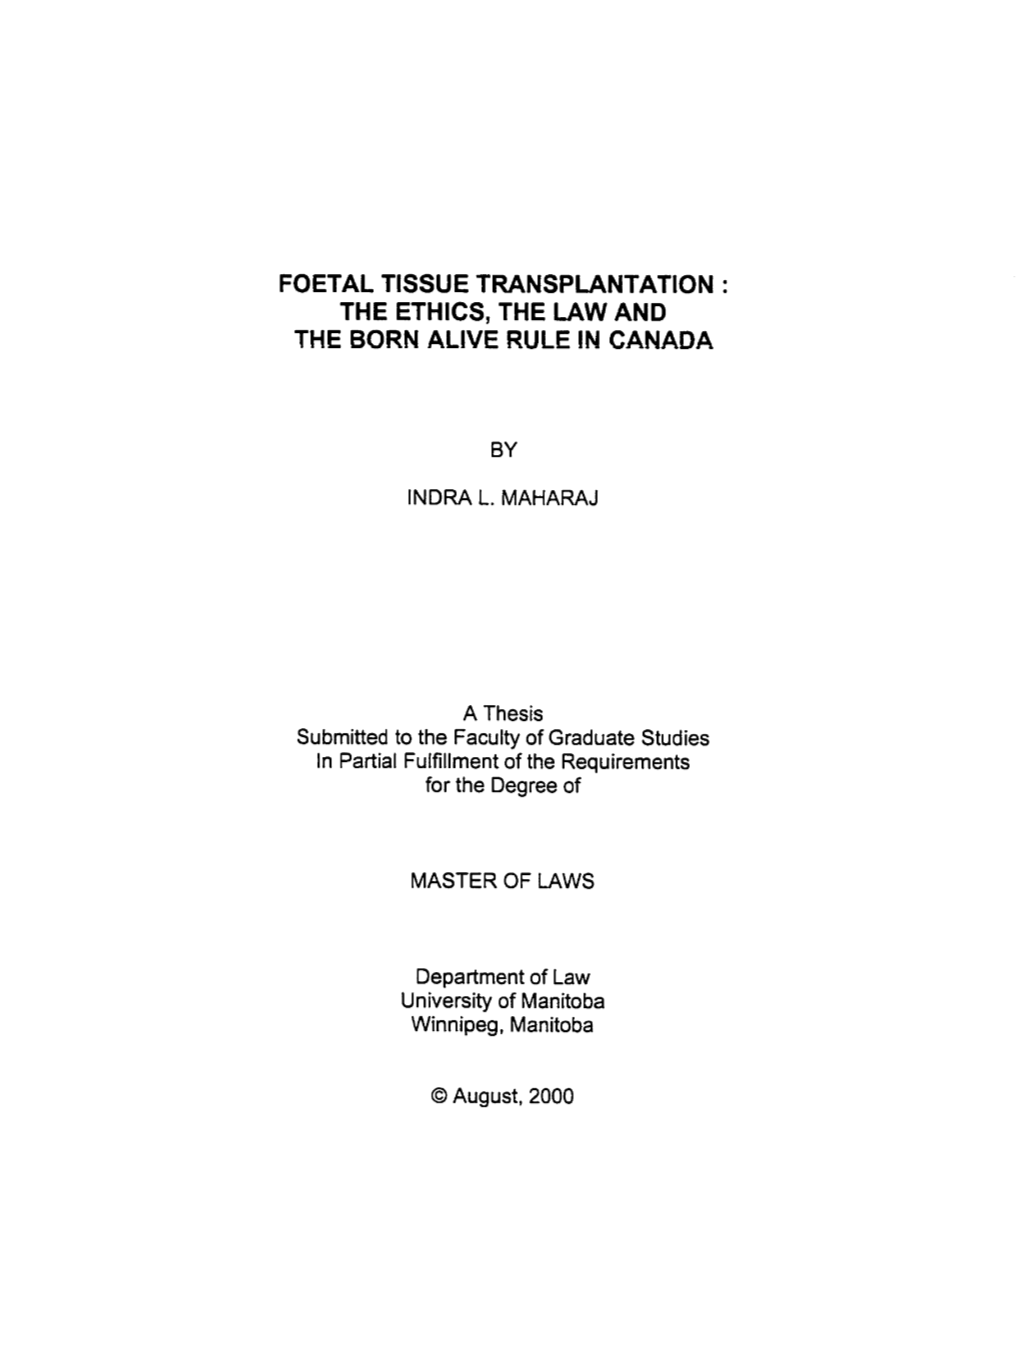 The Ethics, the Law and the Born Alive Rule in Canada